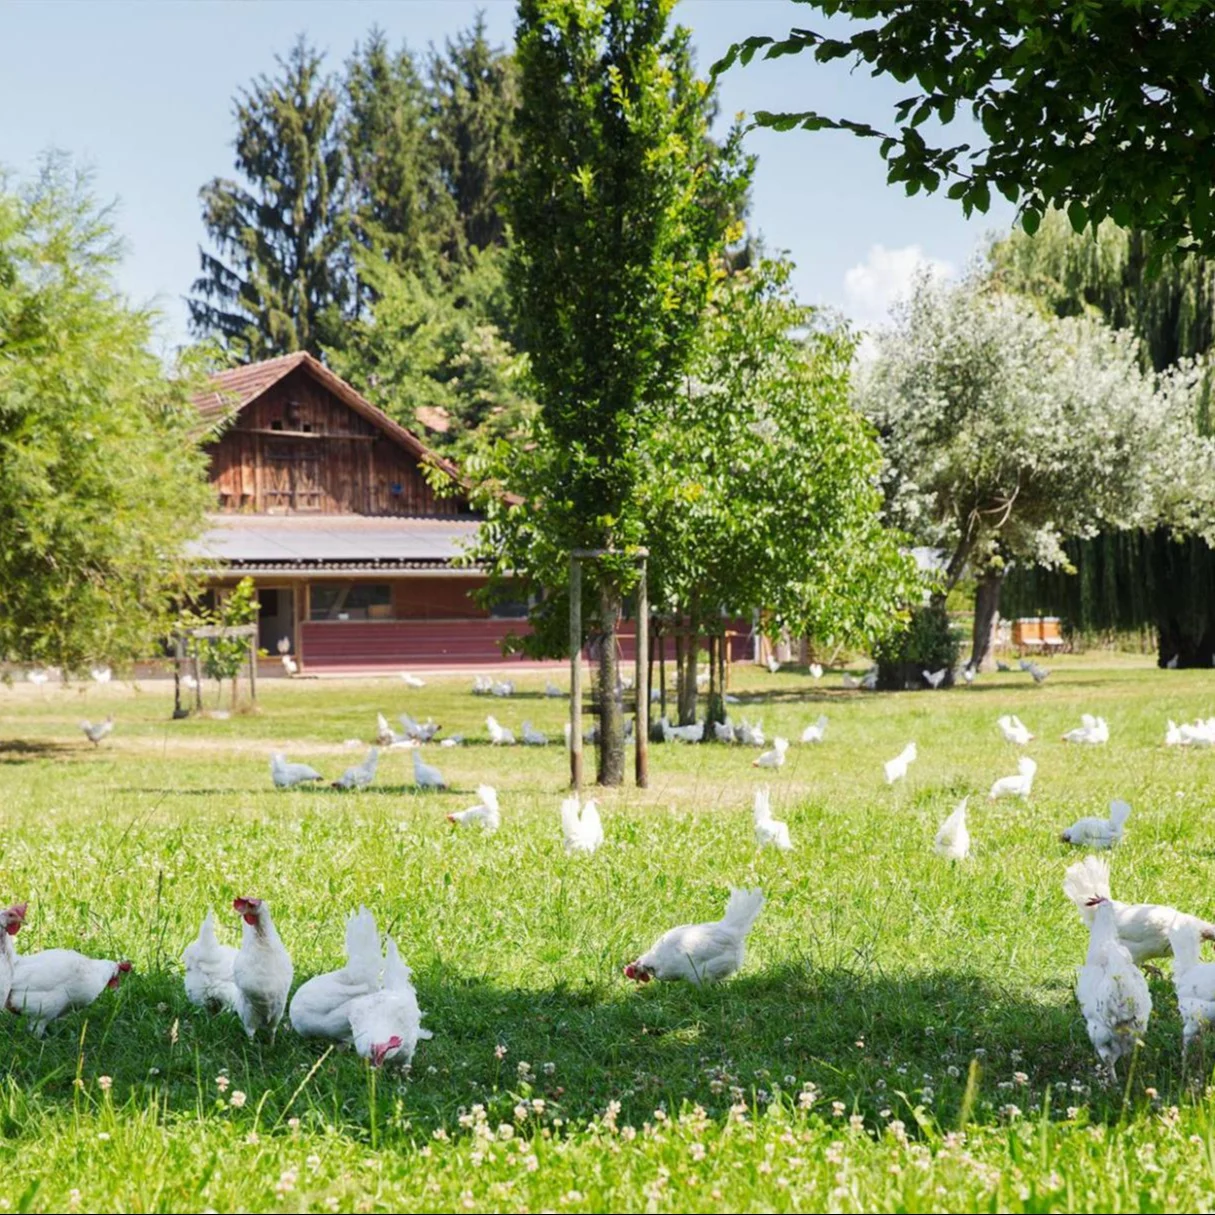 White chickens in a pasture, under the shade of some trees.